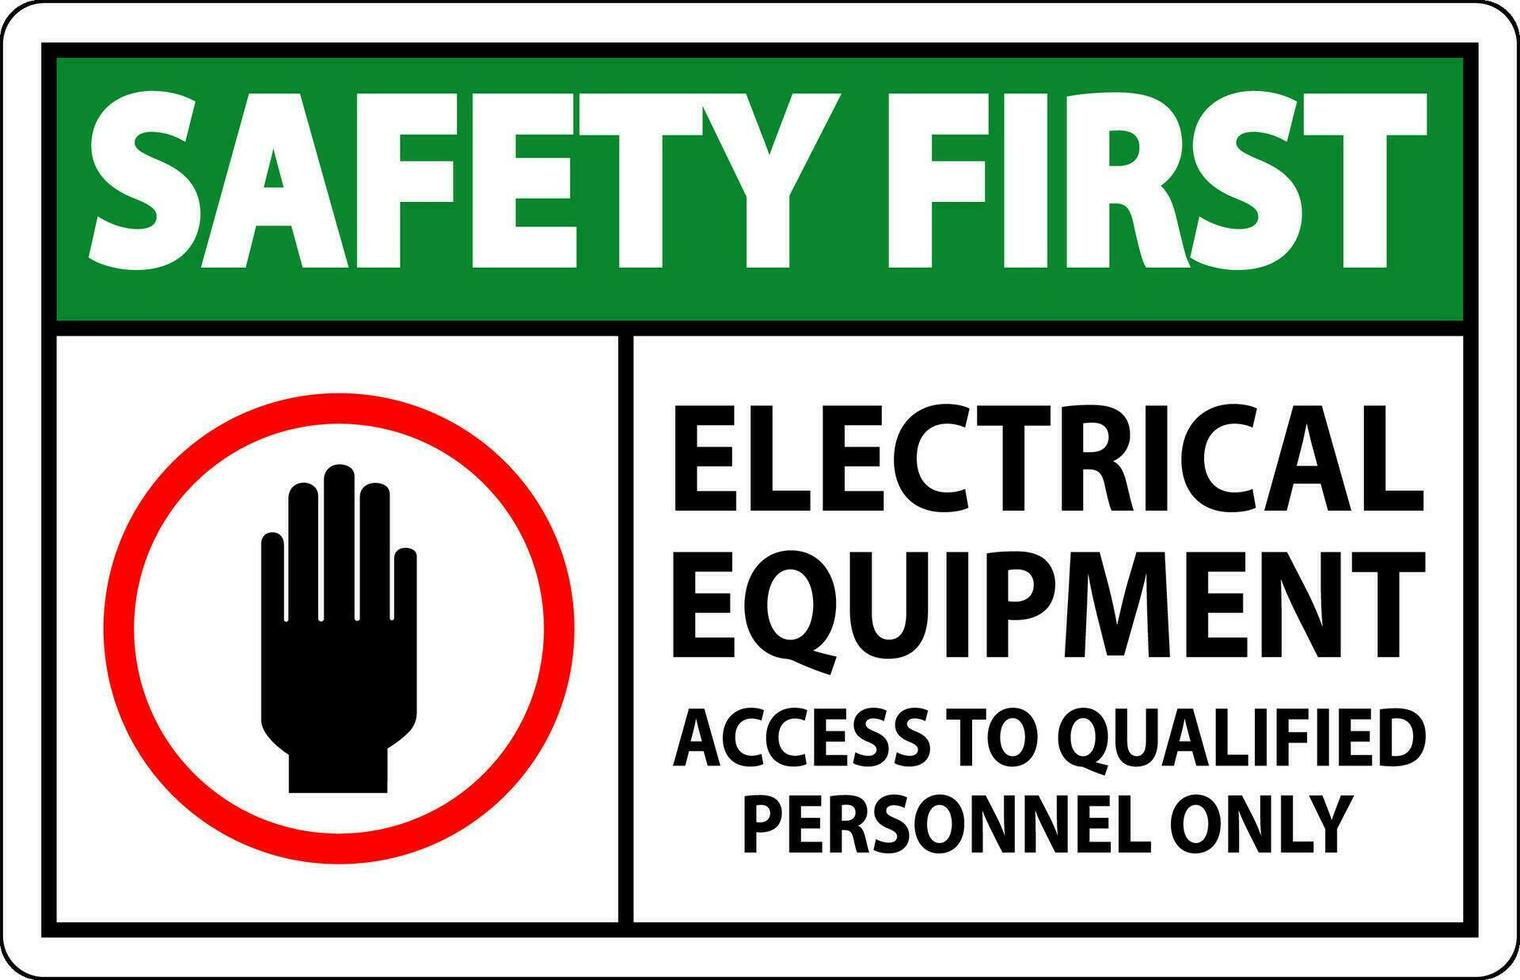 Safety First Sign Electrical Equipment Authorized Personnel Only vector